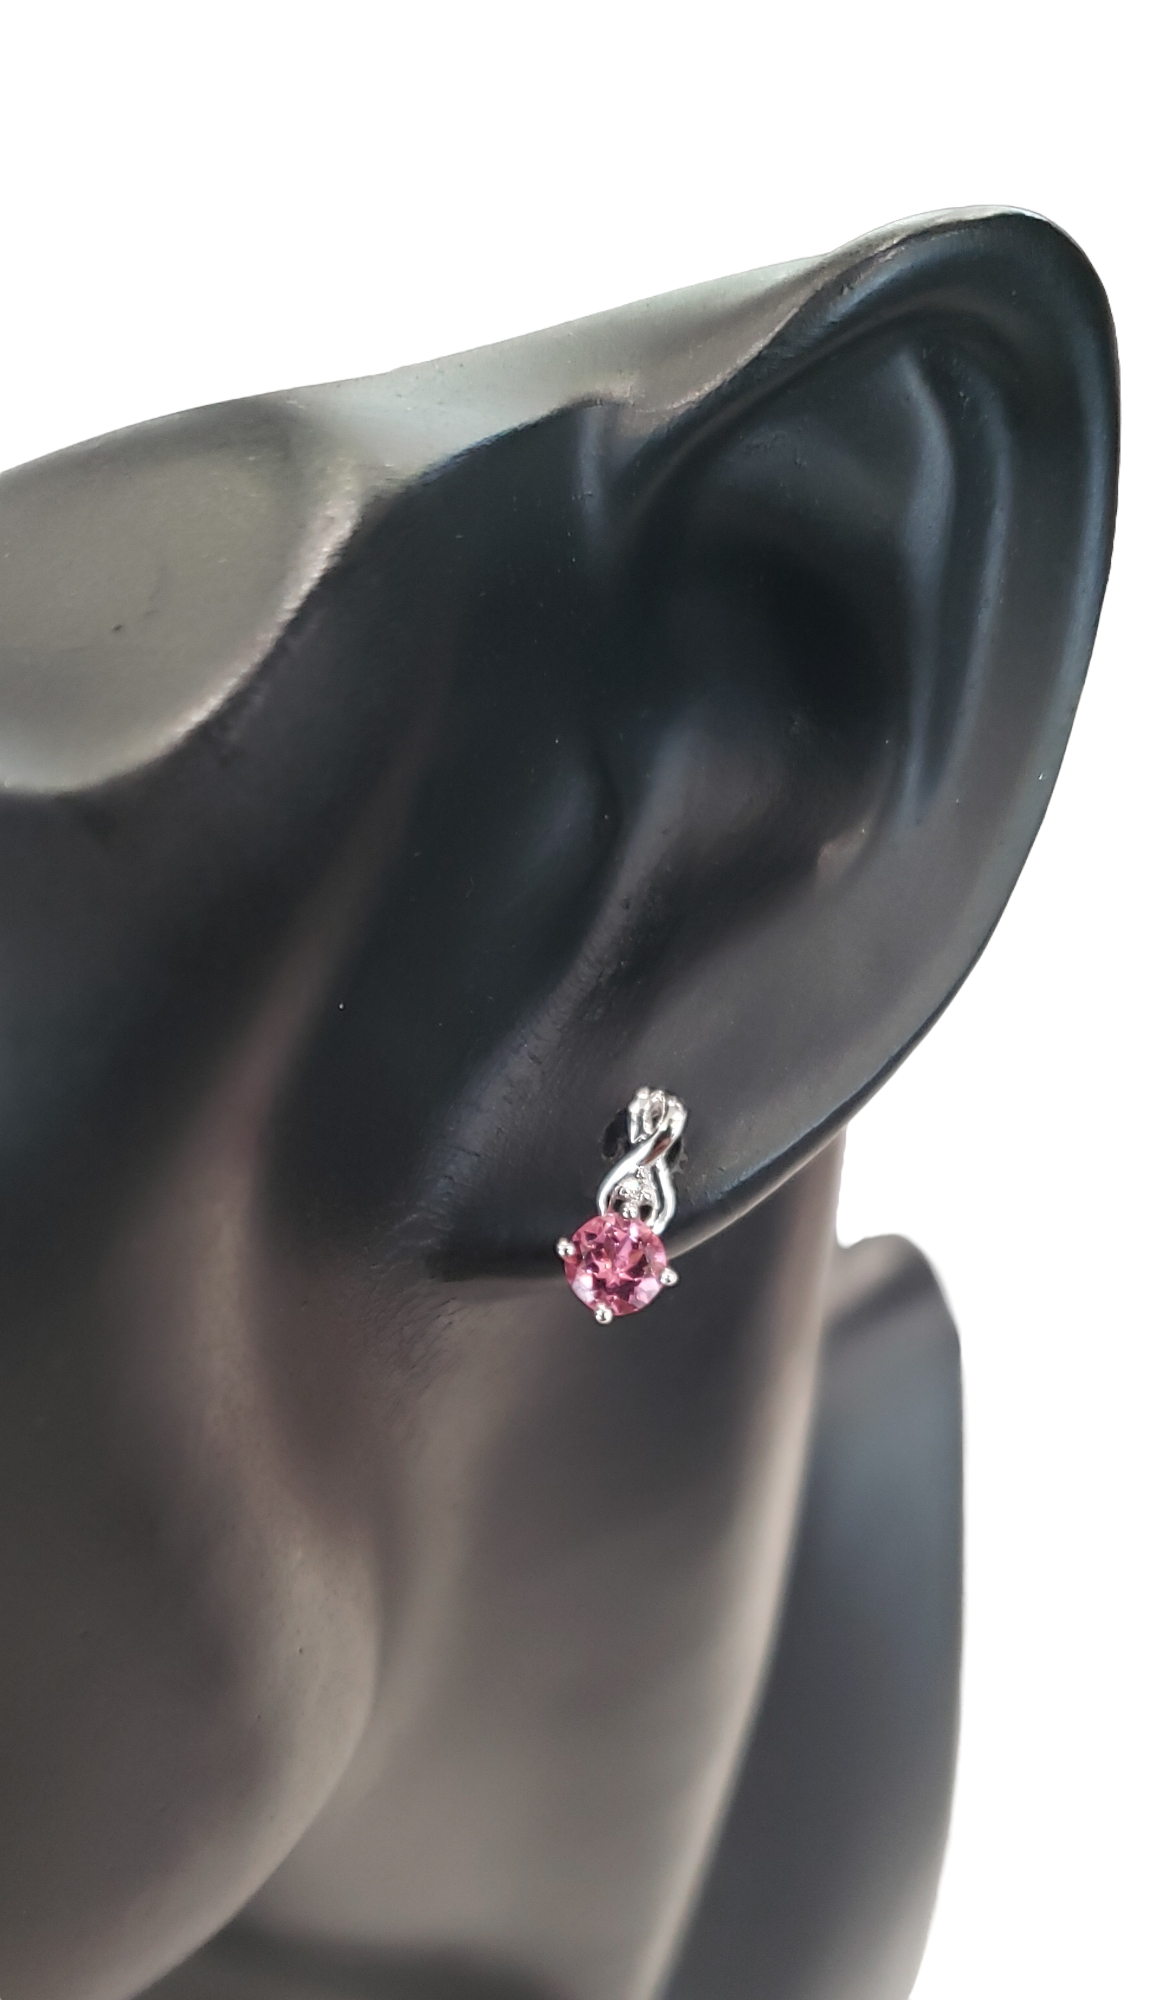 10K White Gold 0.90cttw Pink Tourmaline and 0.012cttw Diamond Stud Earrings with Butterfly Backings